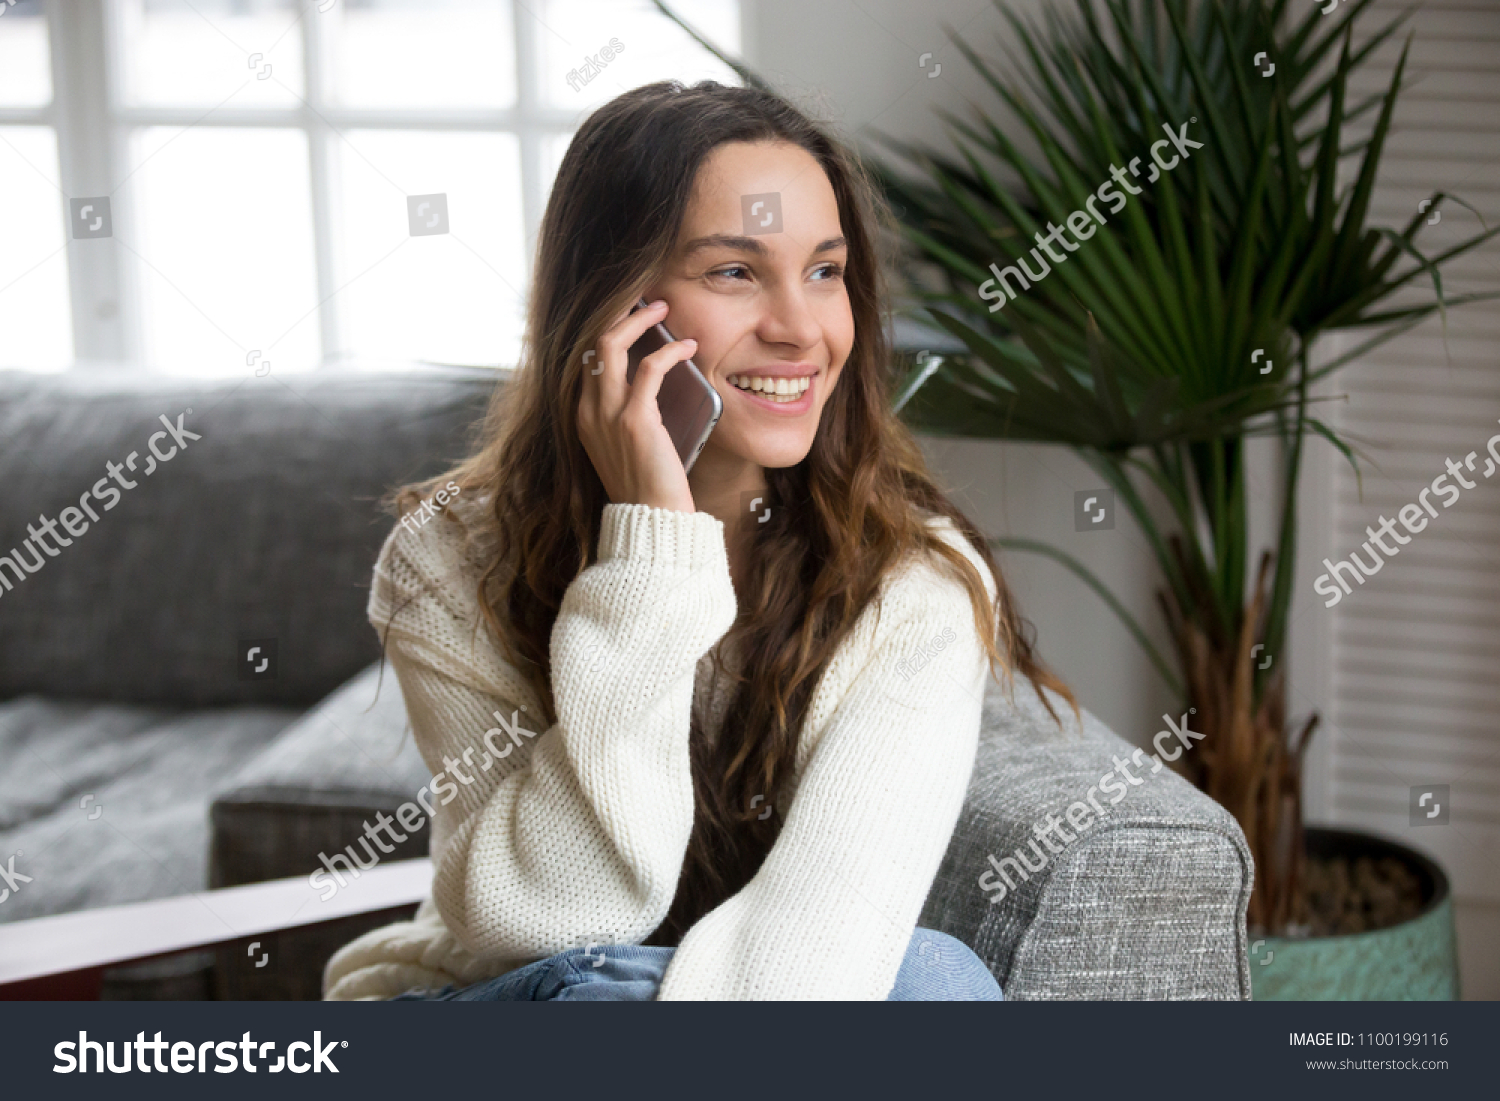 Smiling millennial woman talking on the phone at home, happy young girl holds cellphone making answering call, attractive teenager having pleasant conversation chatting by mobile with friend #1100199116